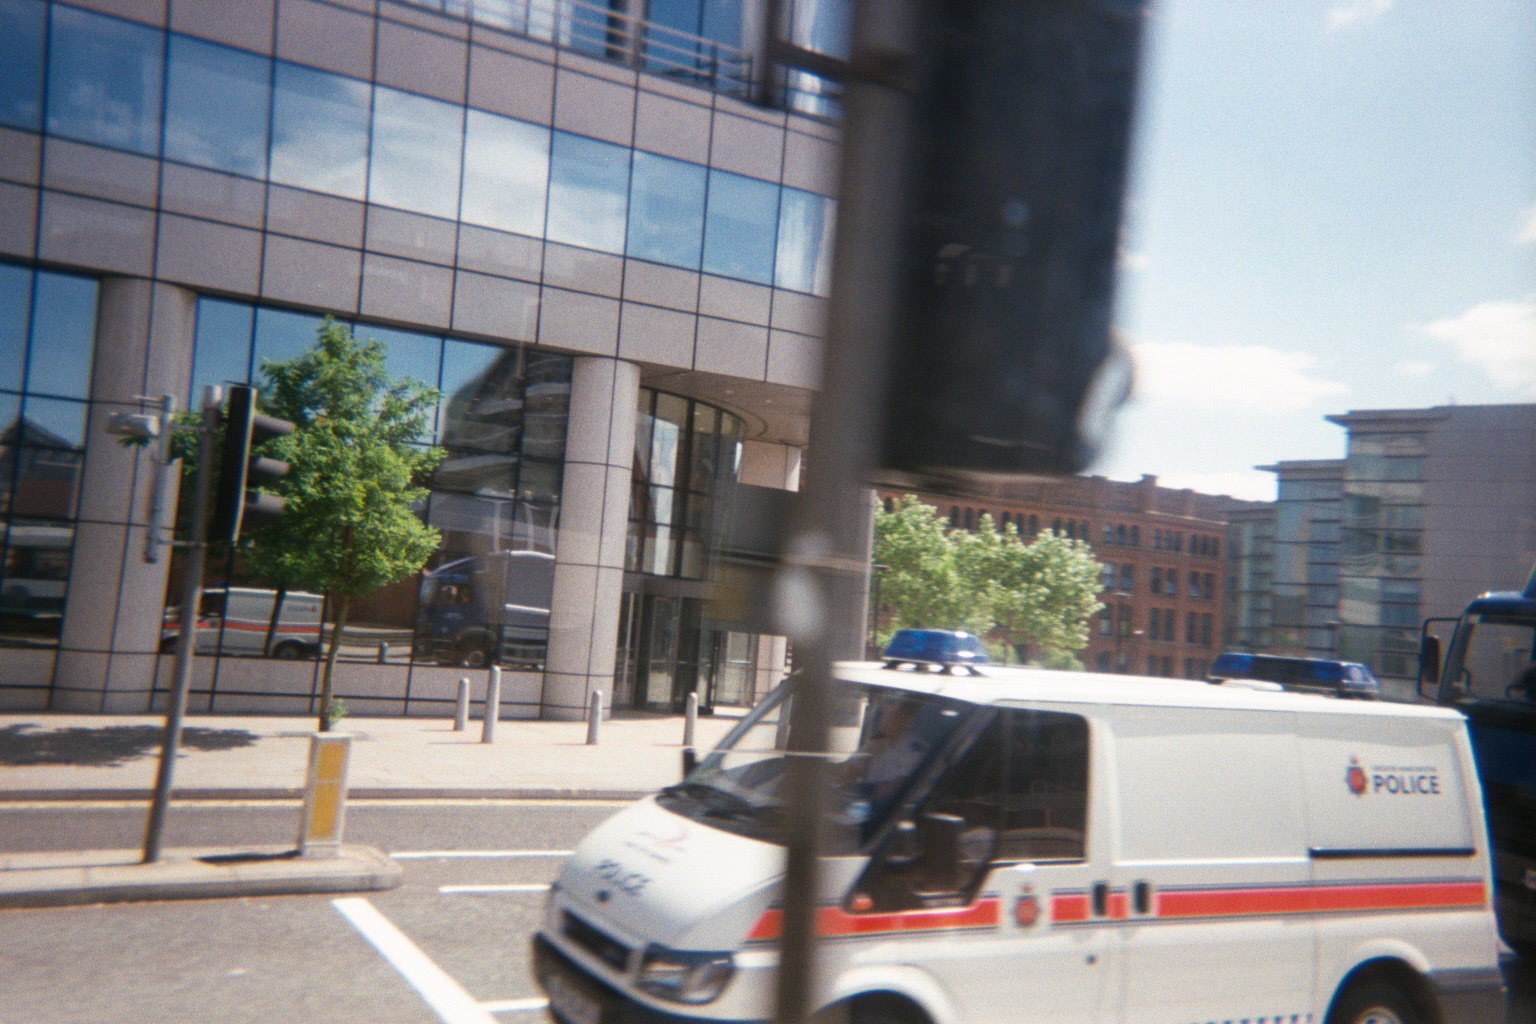 GMP police van, Lower Mosley St, Manchester